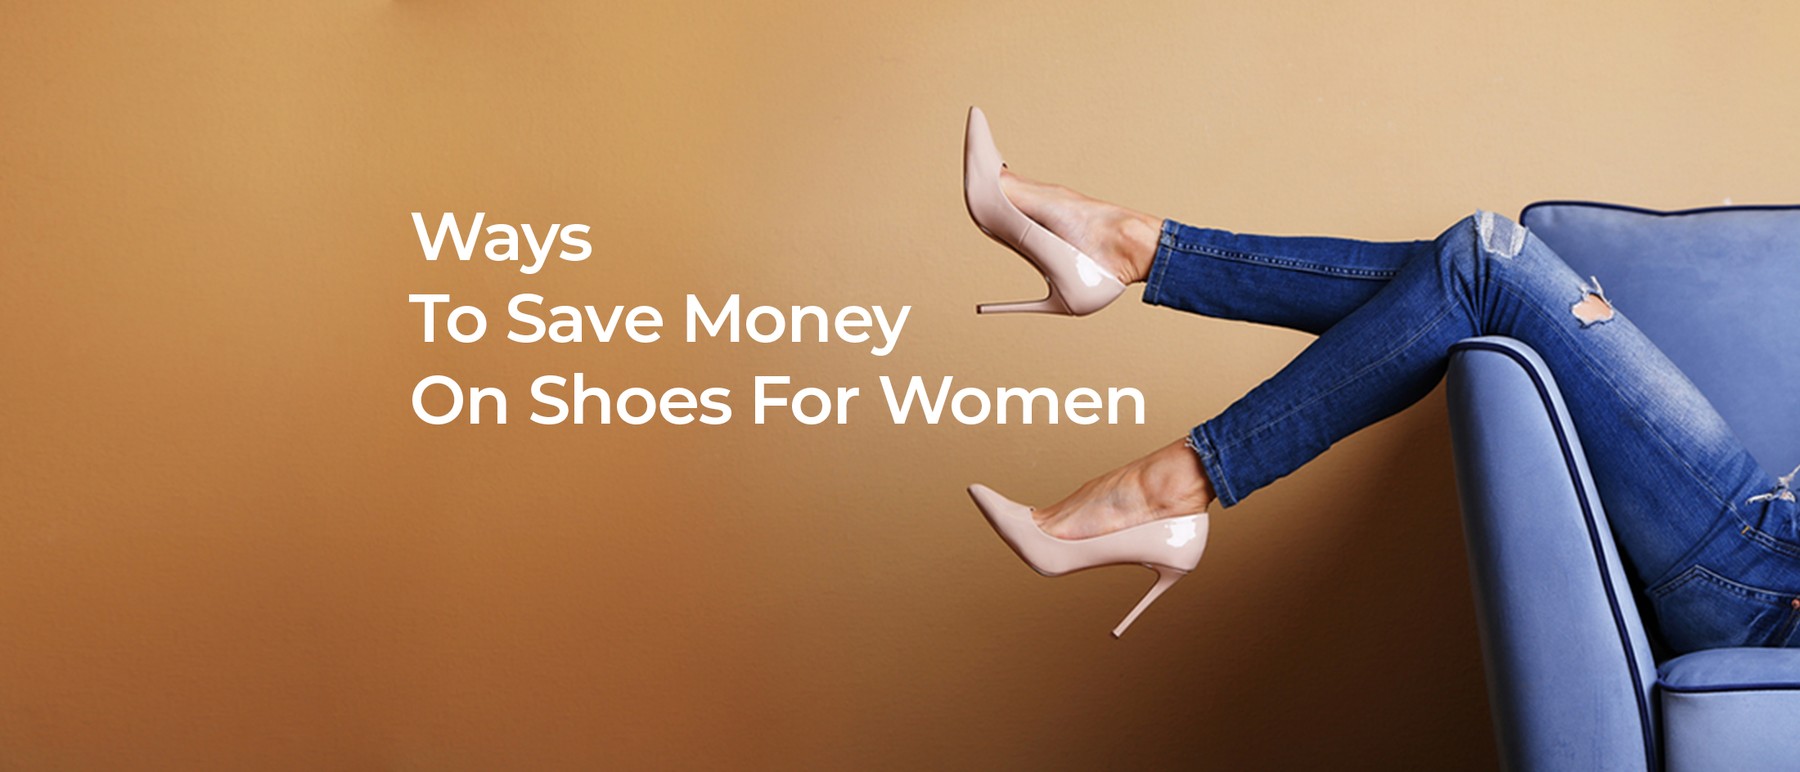 Put Your Best Foot Forward: How to Save Money When Shopping for Women’s Shoes